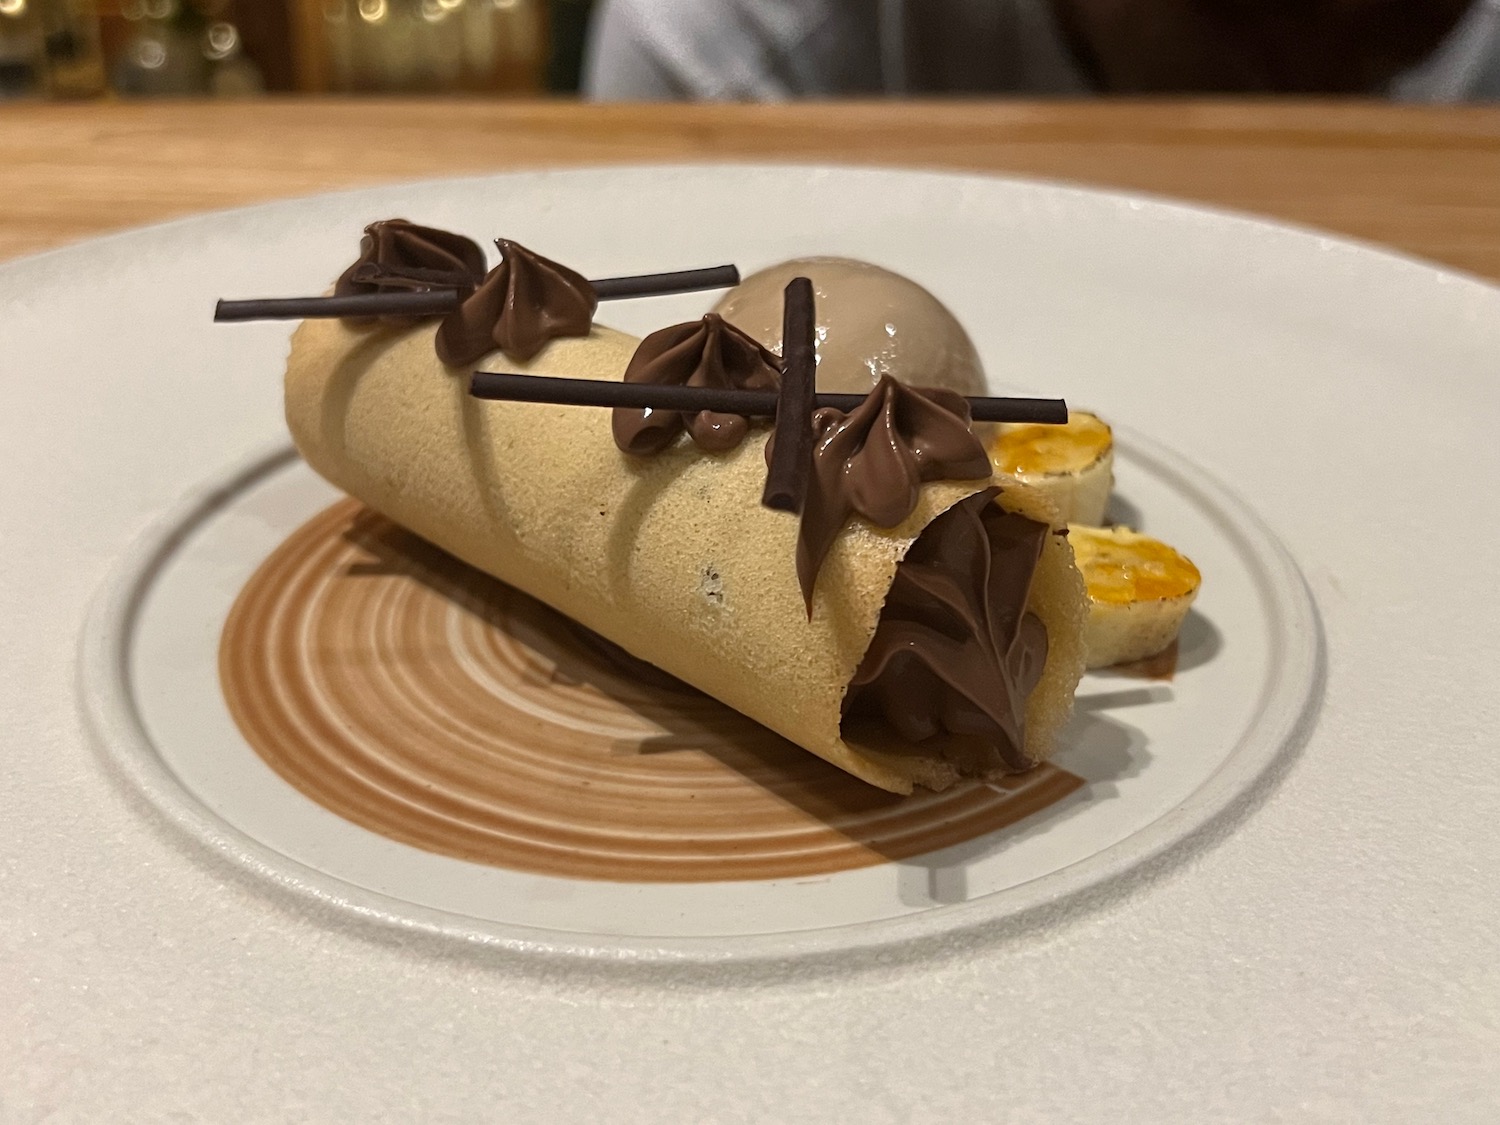 a crepe with chocolate frosting and ice cream on a plate